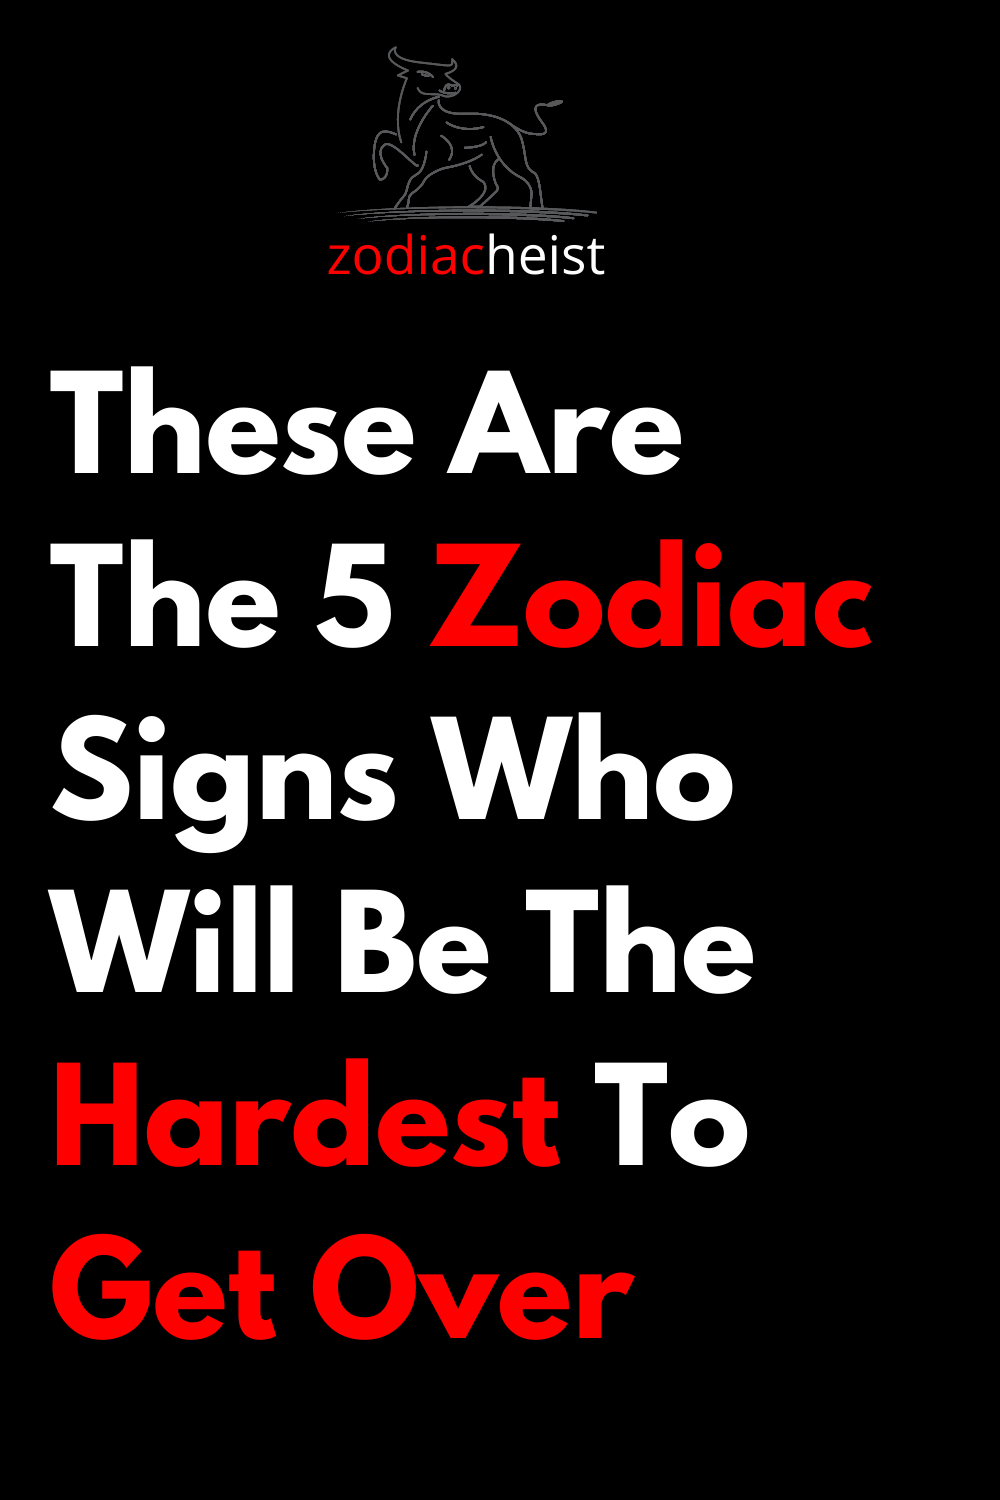 These Are The 5 Zodiac Signs Who Will Be The Hardest To Get Over